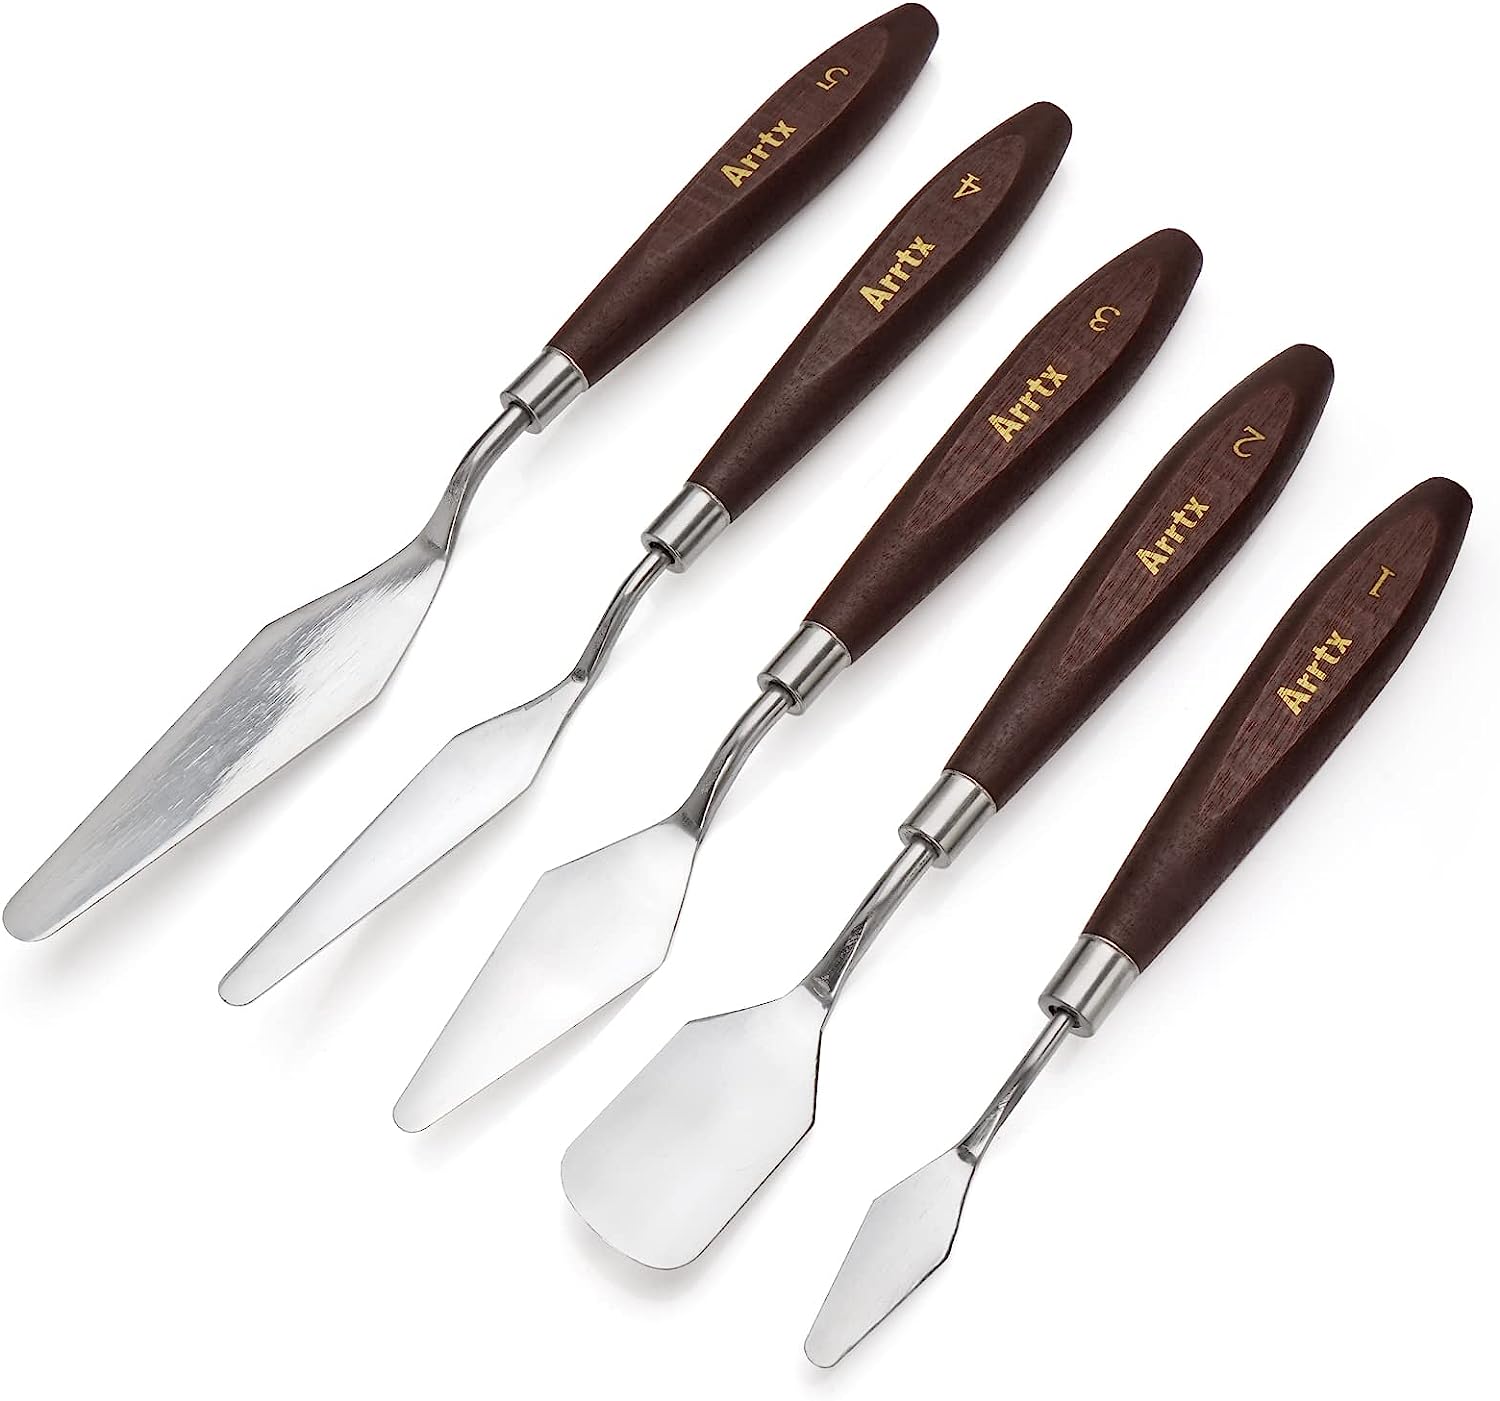 5 Pieces Painting Knives Stainless Steel Spatula [...]